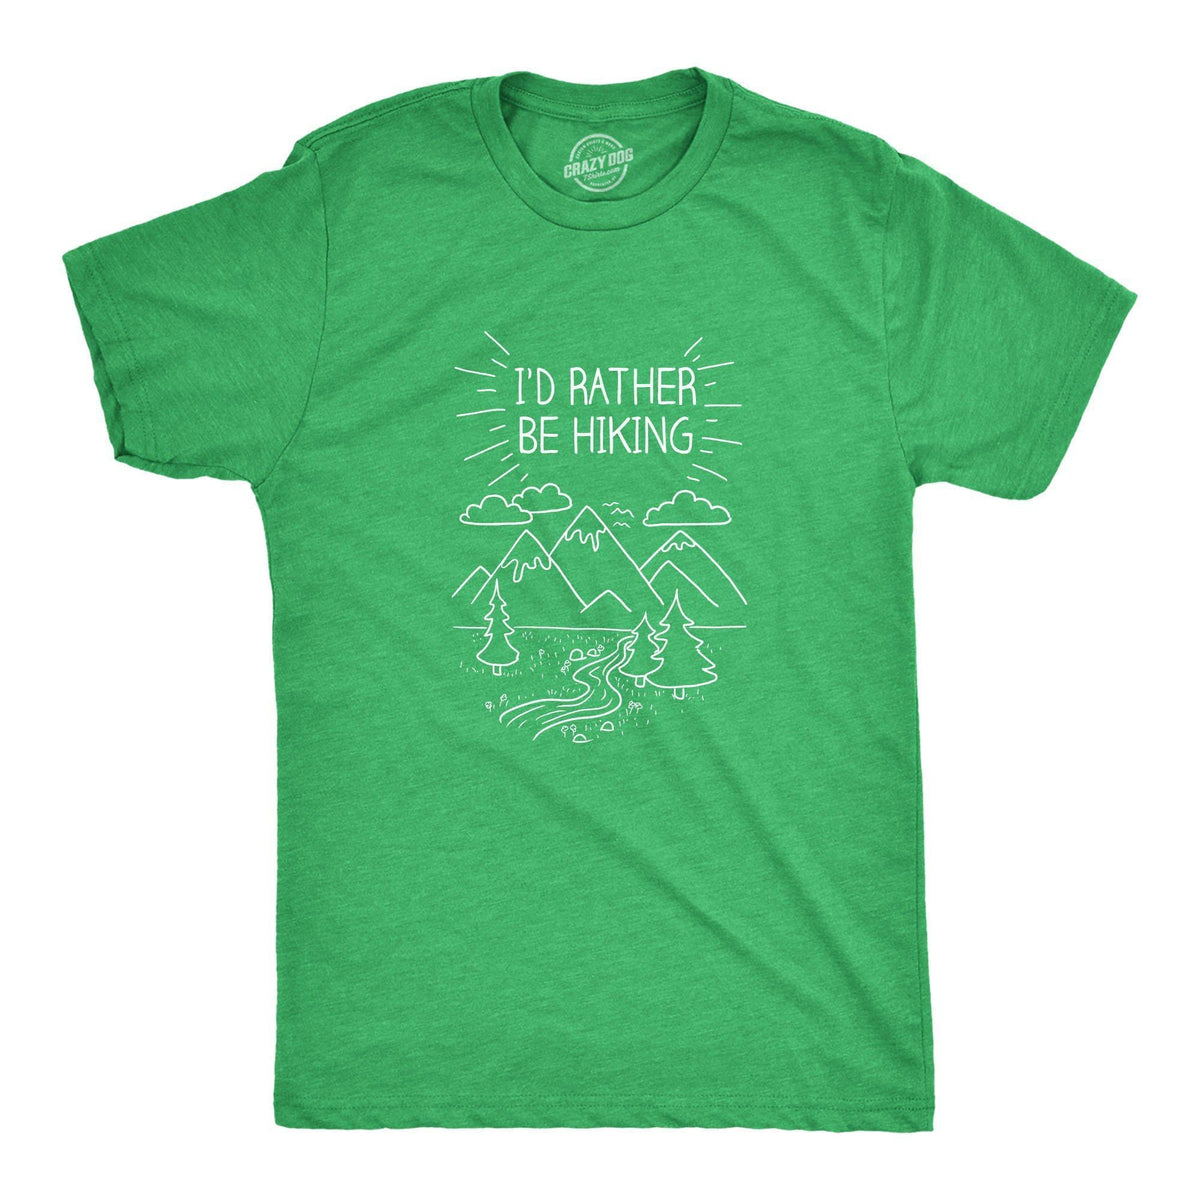 Mens I'd Rather Be Hiking Funny Summer Nature Camping T Shirt (Green) S